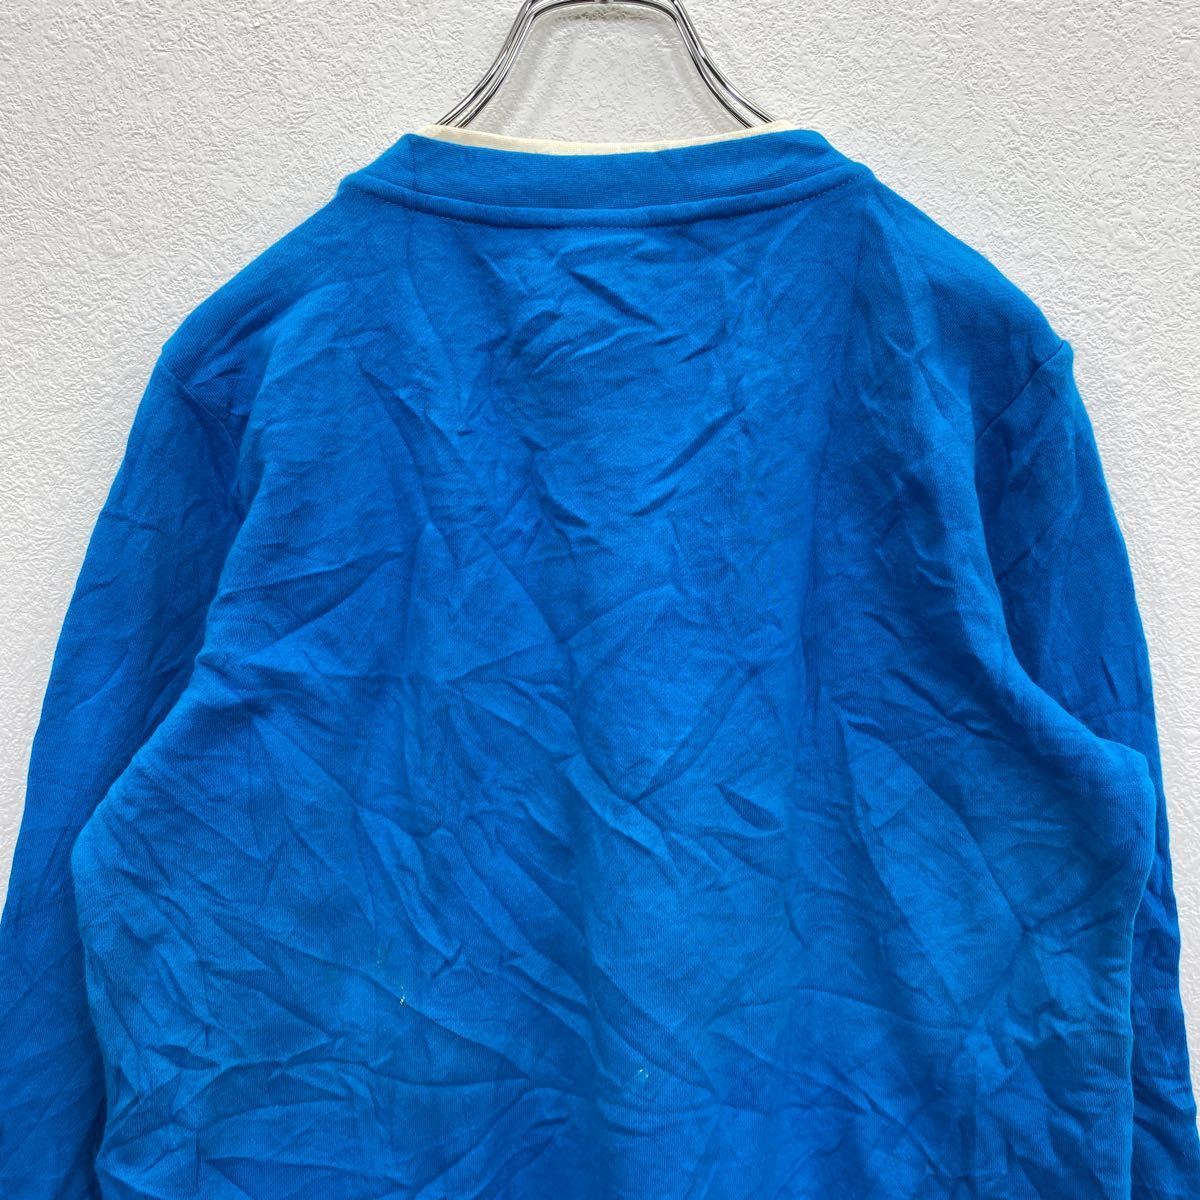 LAURA SCOTT sweat lady's S blue roller Scott reverse side nappy sweatshirt embroidery snow. crystal old clothes . America buying up t2201-4617